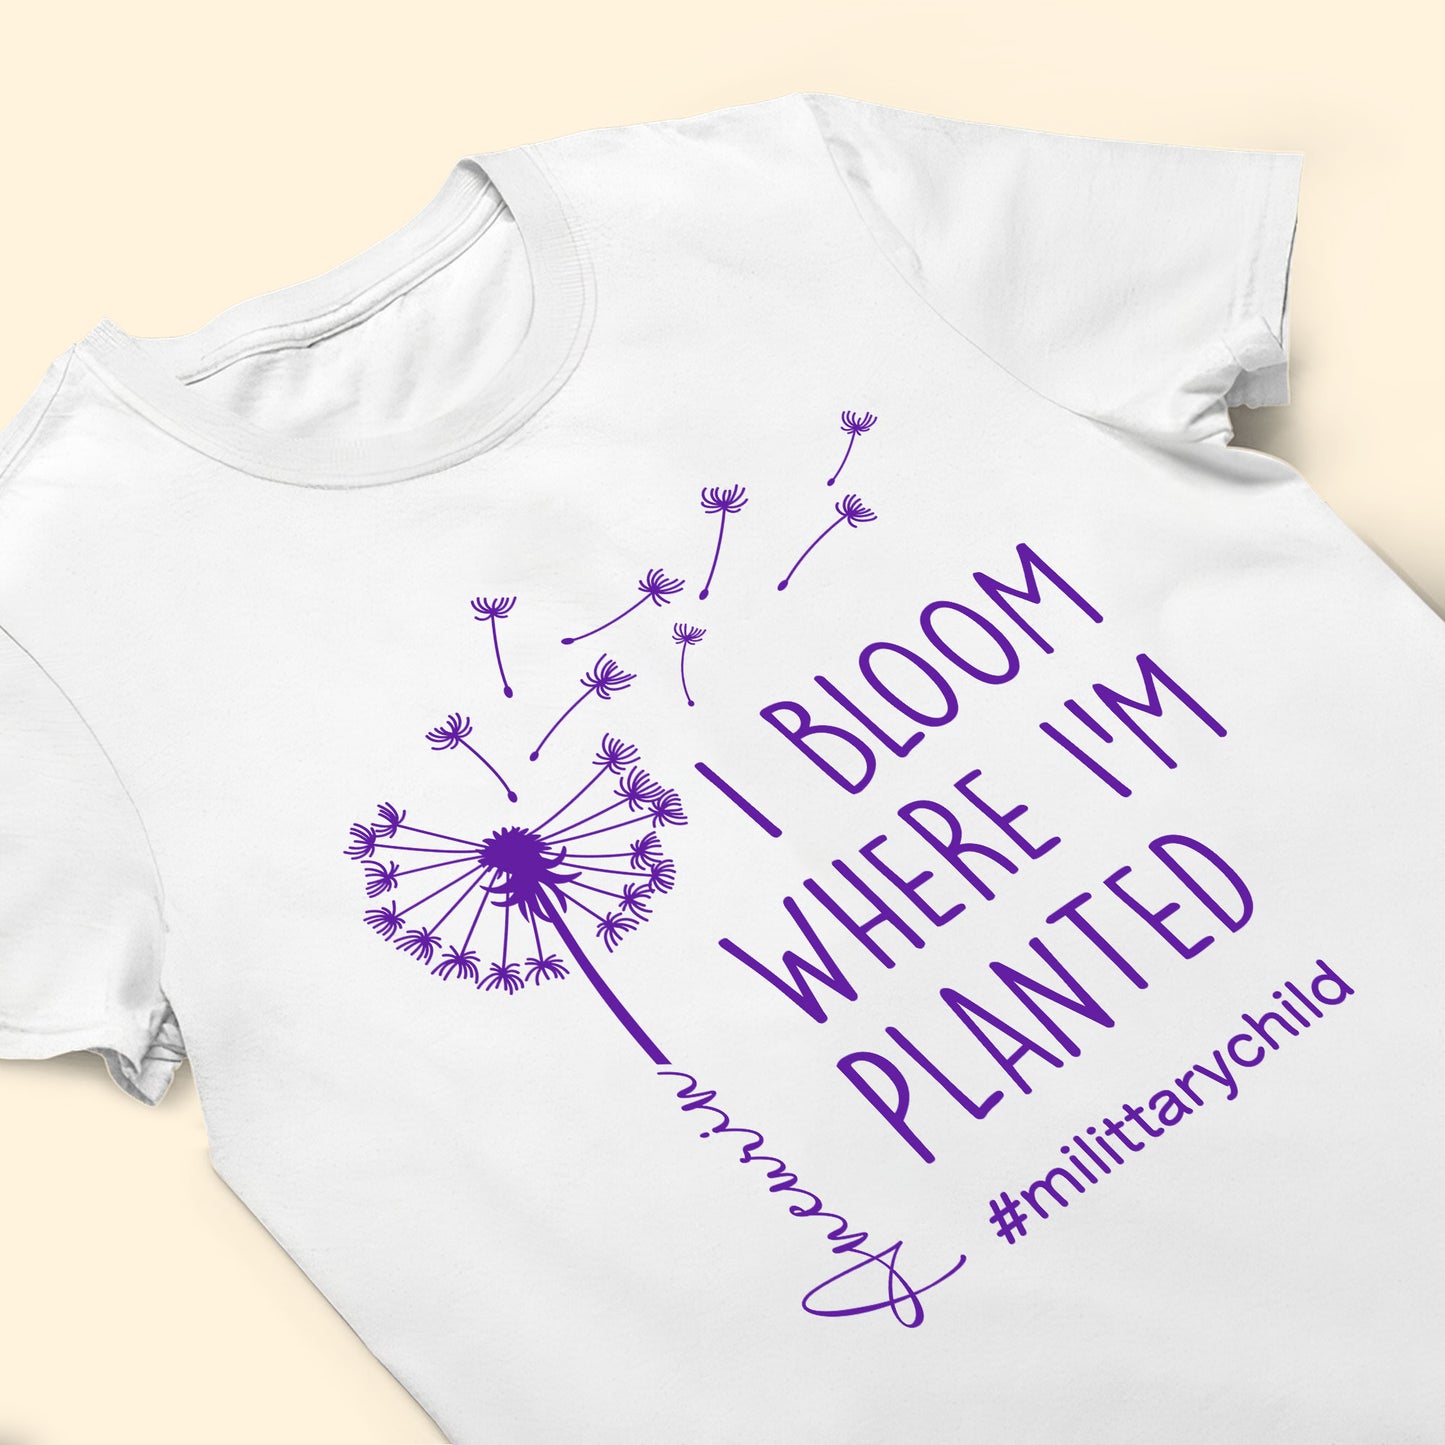 I Bloom Where I'm Planted - Personalized Shirt